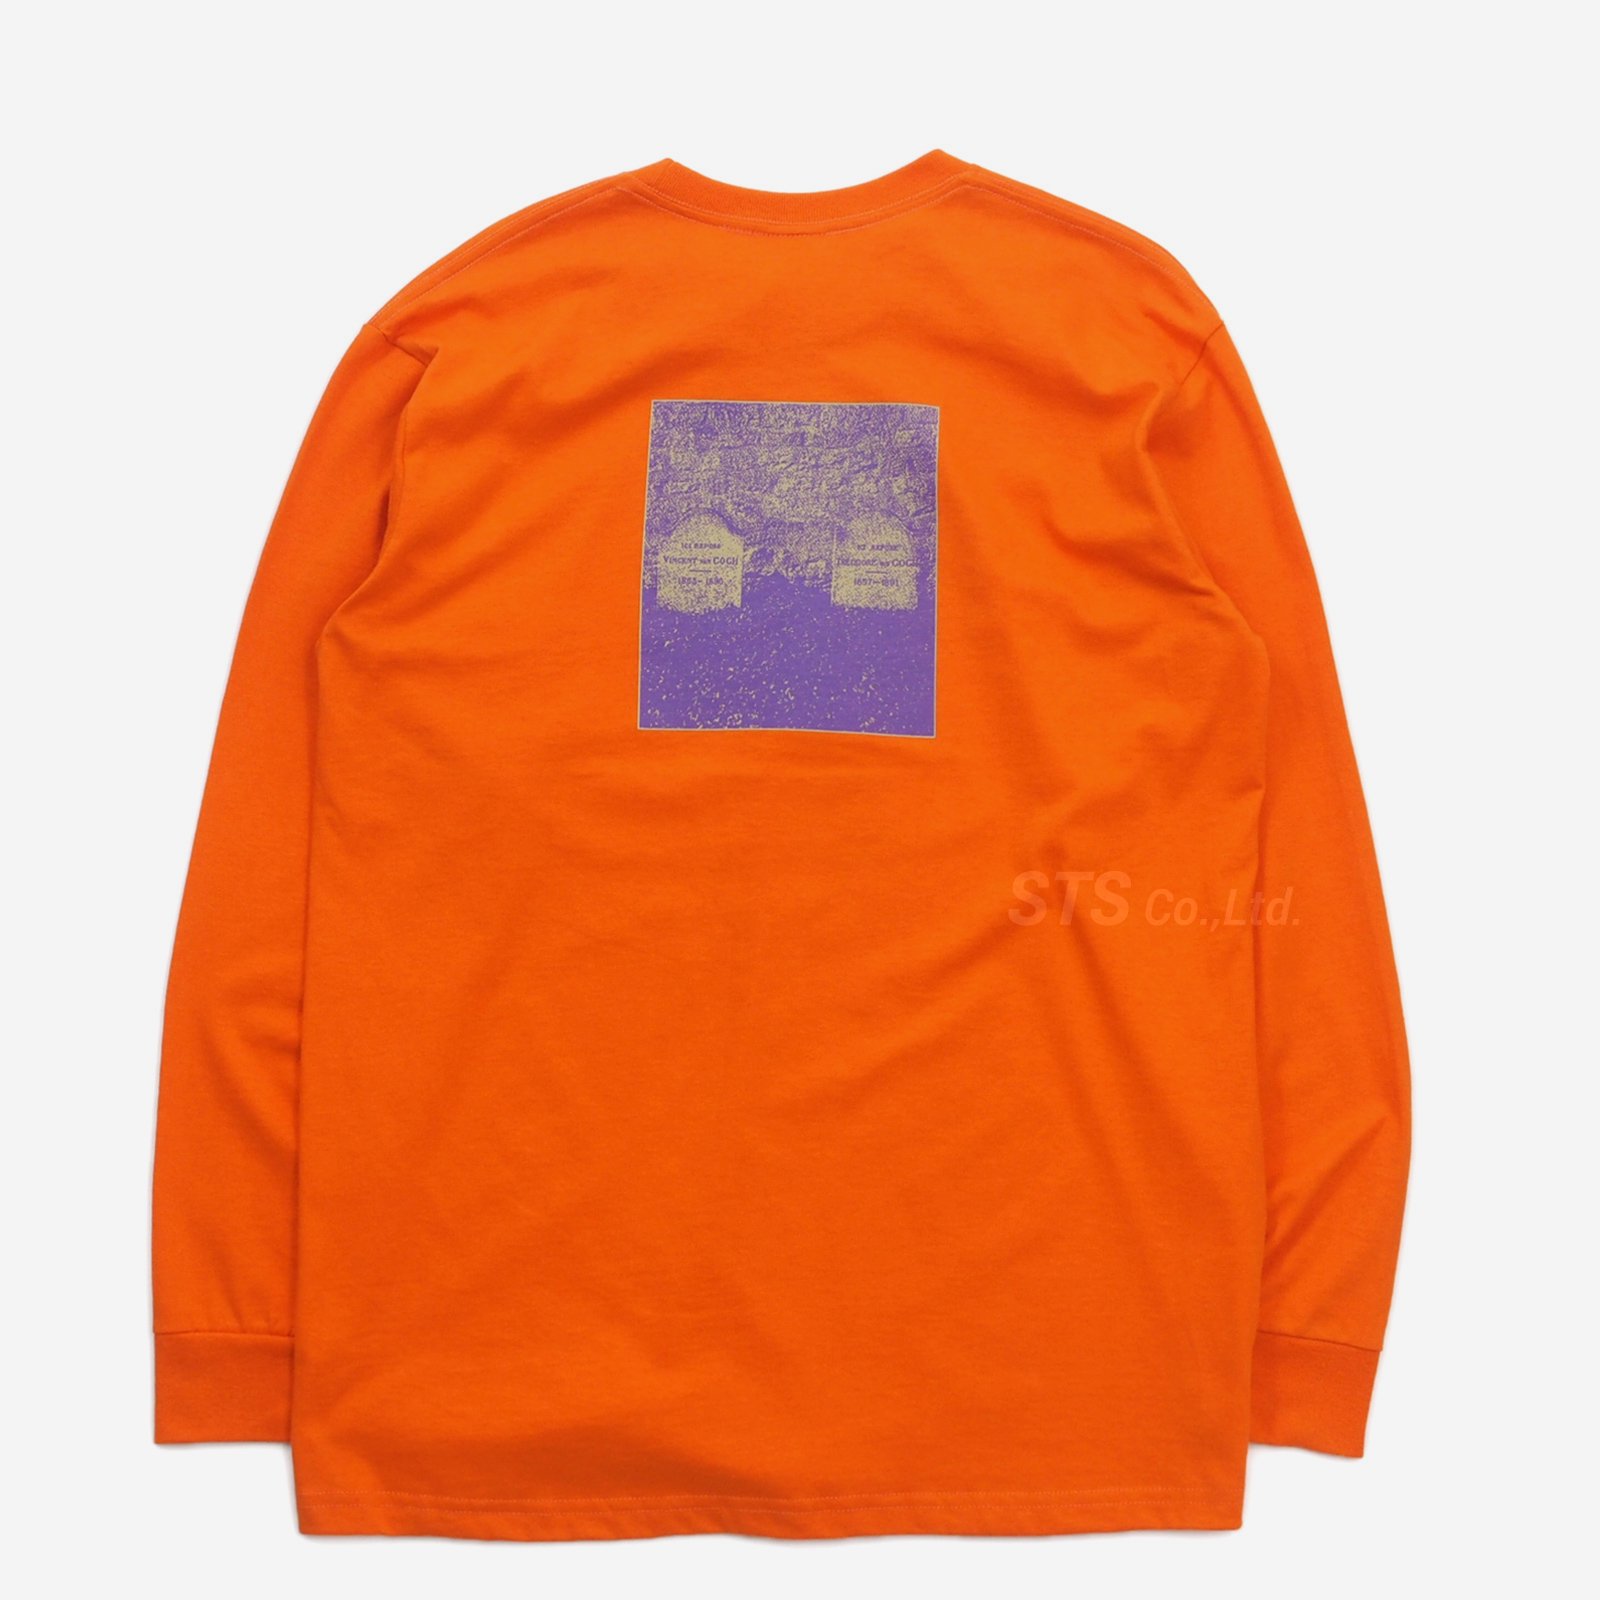 Supreme - The Real Shit L/S Tee - ParkSIDER